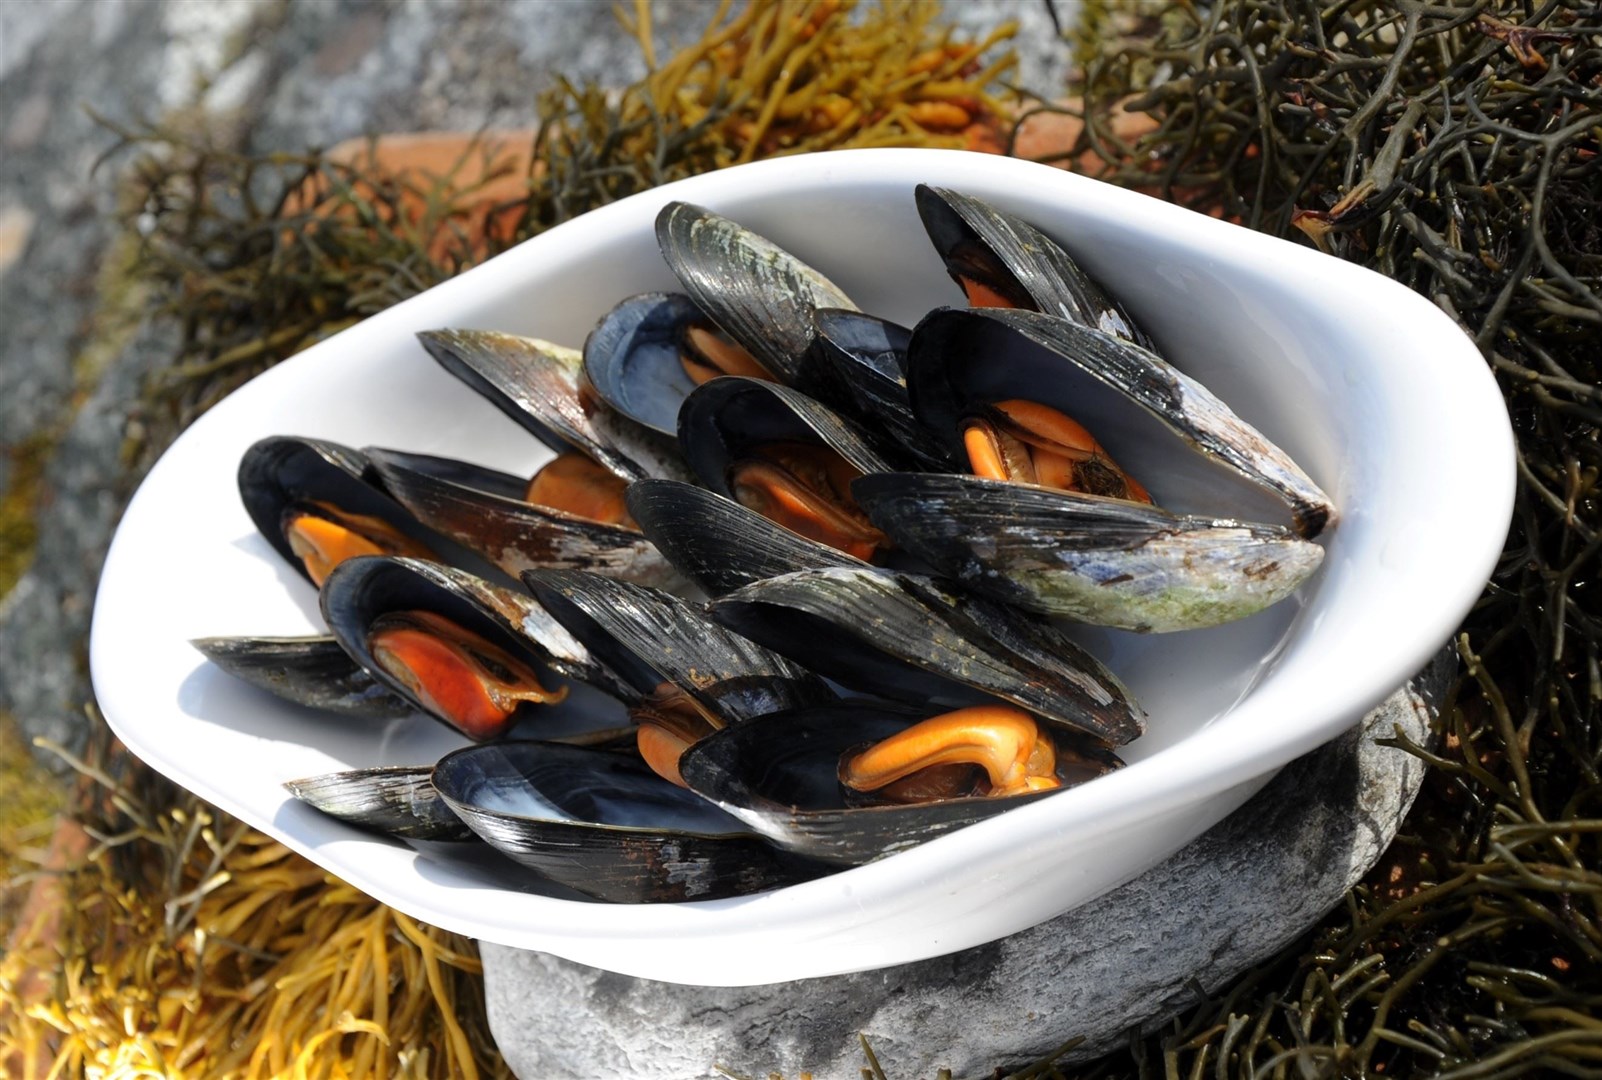 People have been advised to avoid eating certain types of shellfish from the area affected by a rise in naturally occurring algal toxins in Wester Ross until further notice.